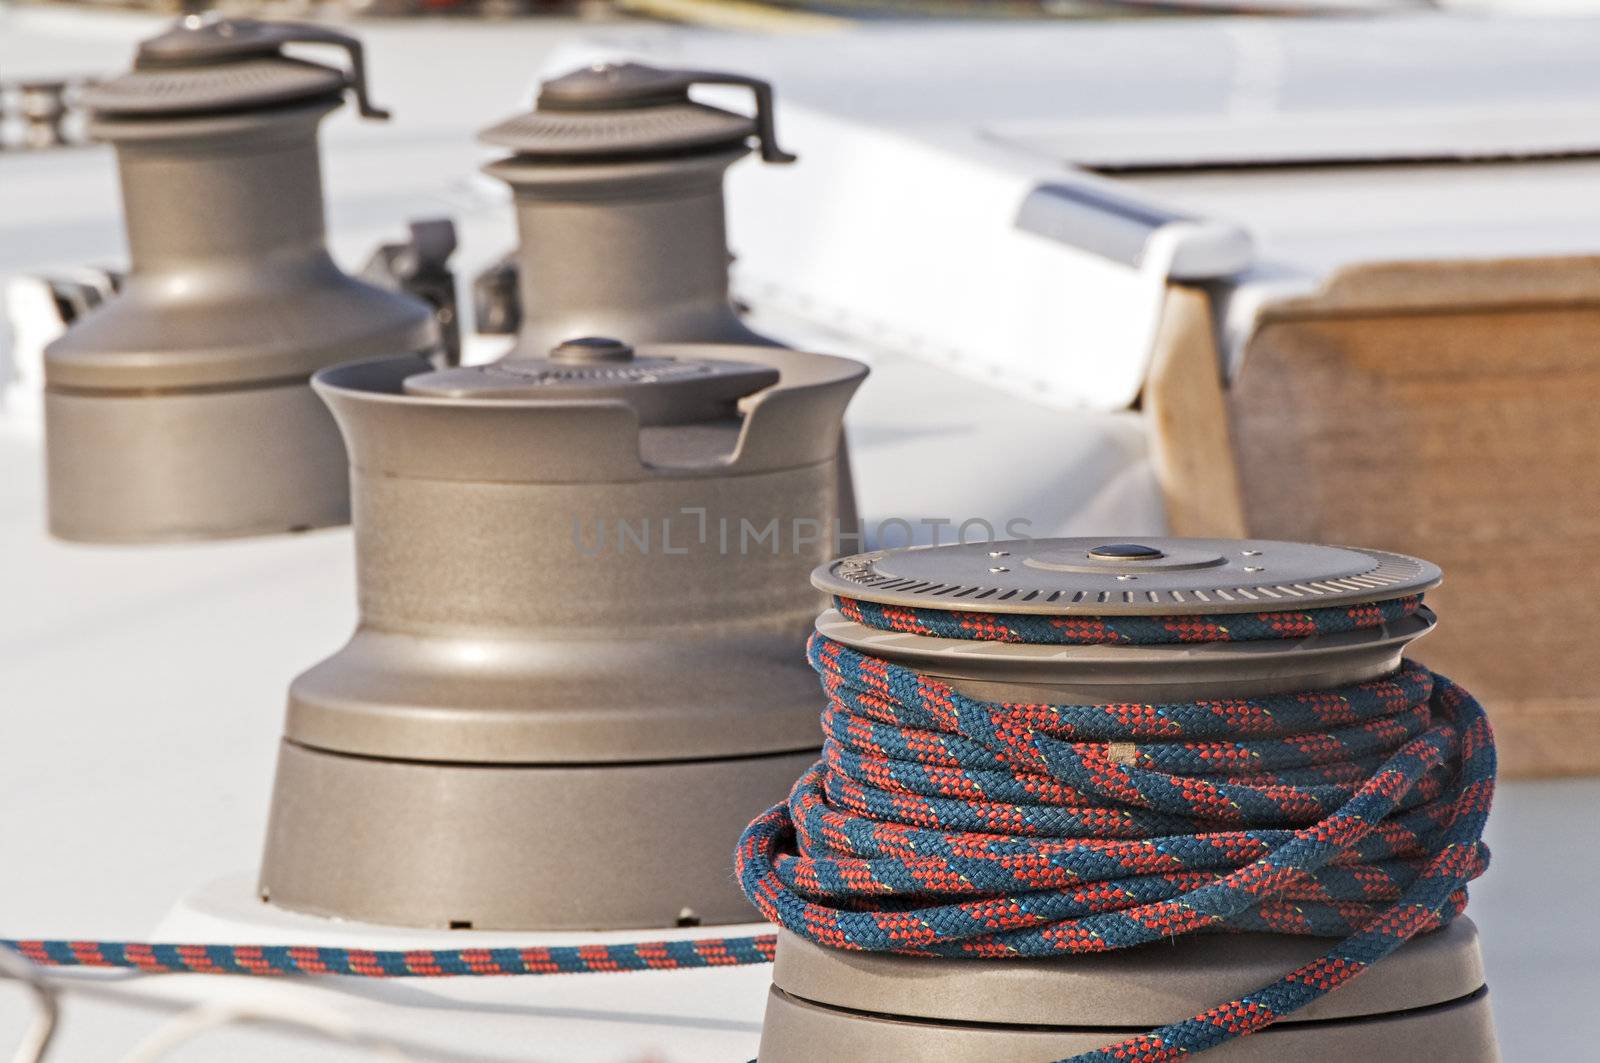 Four winches used to control sails on a boat